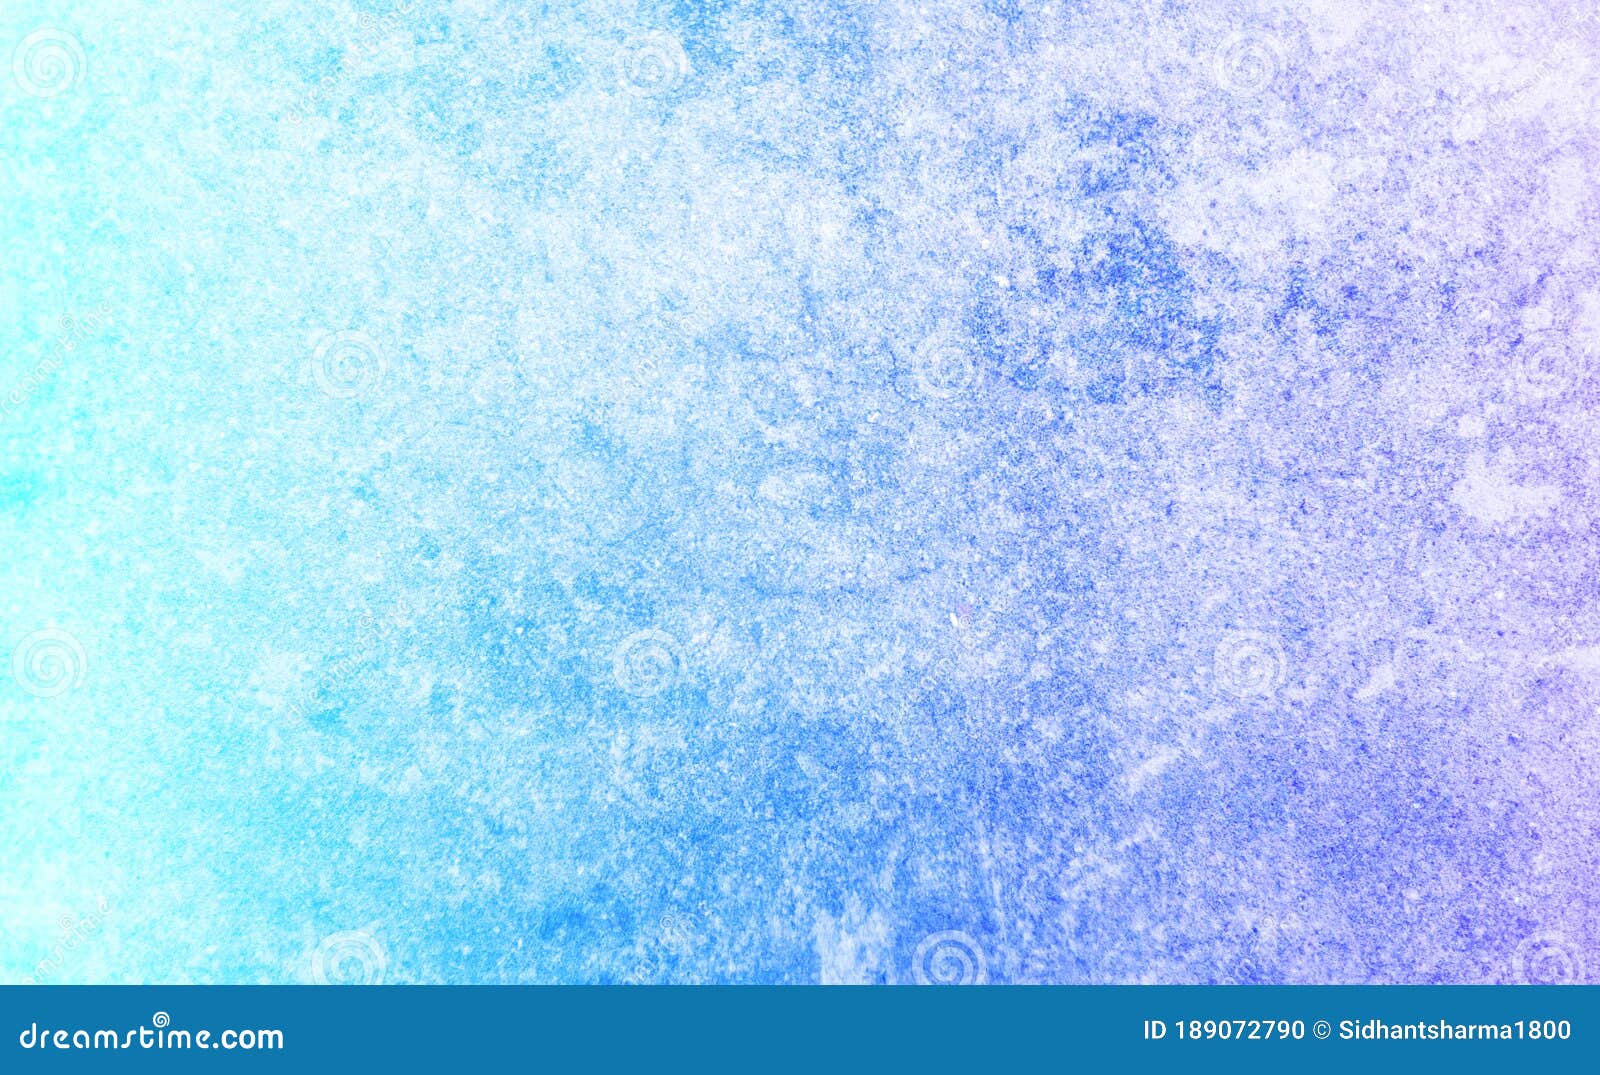 Abstract Sky Blue and Blue Color Mixture Effects Texture Background  Wallpaper Stock Photo - Image of shirt, backgrounds: 189072790